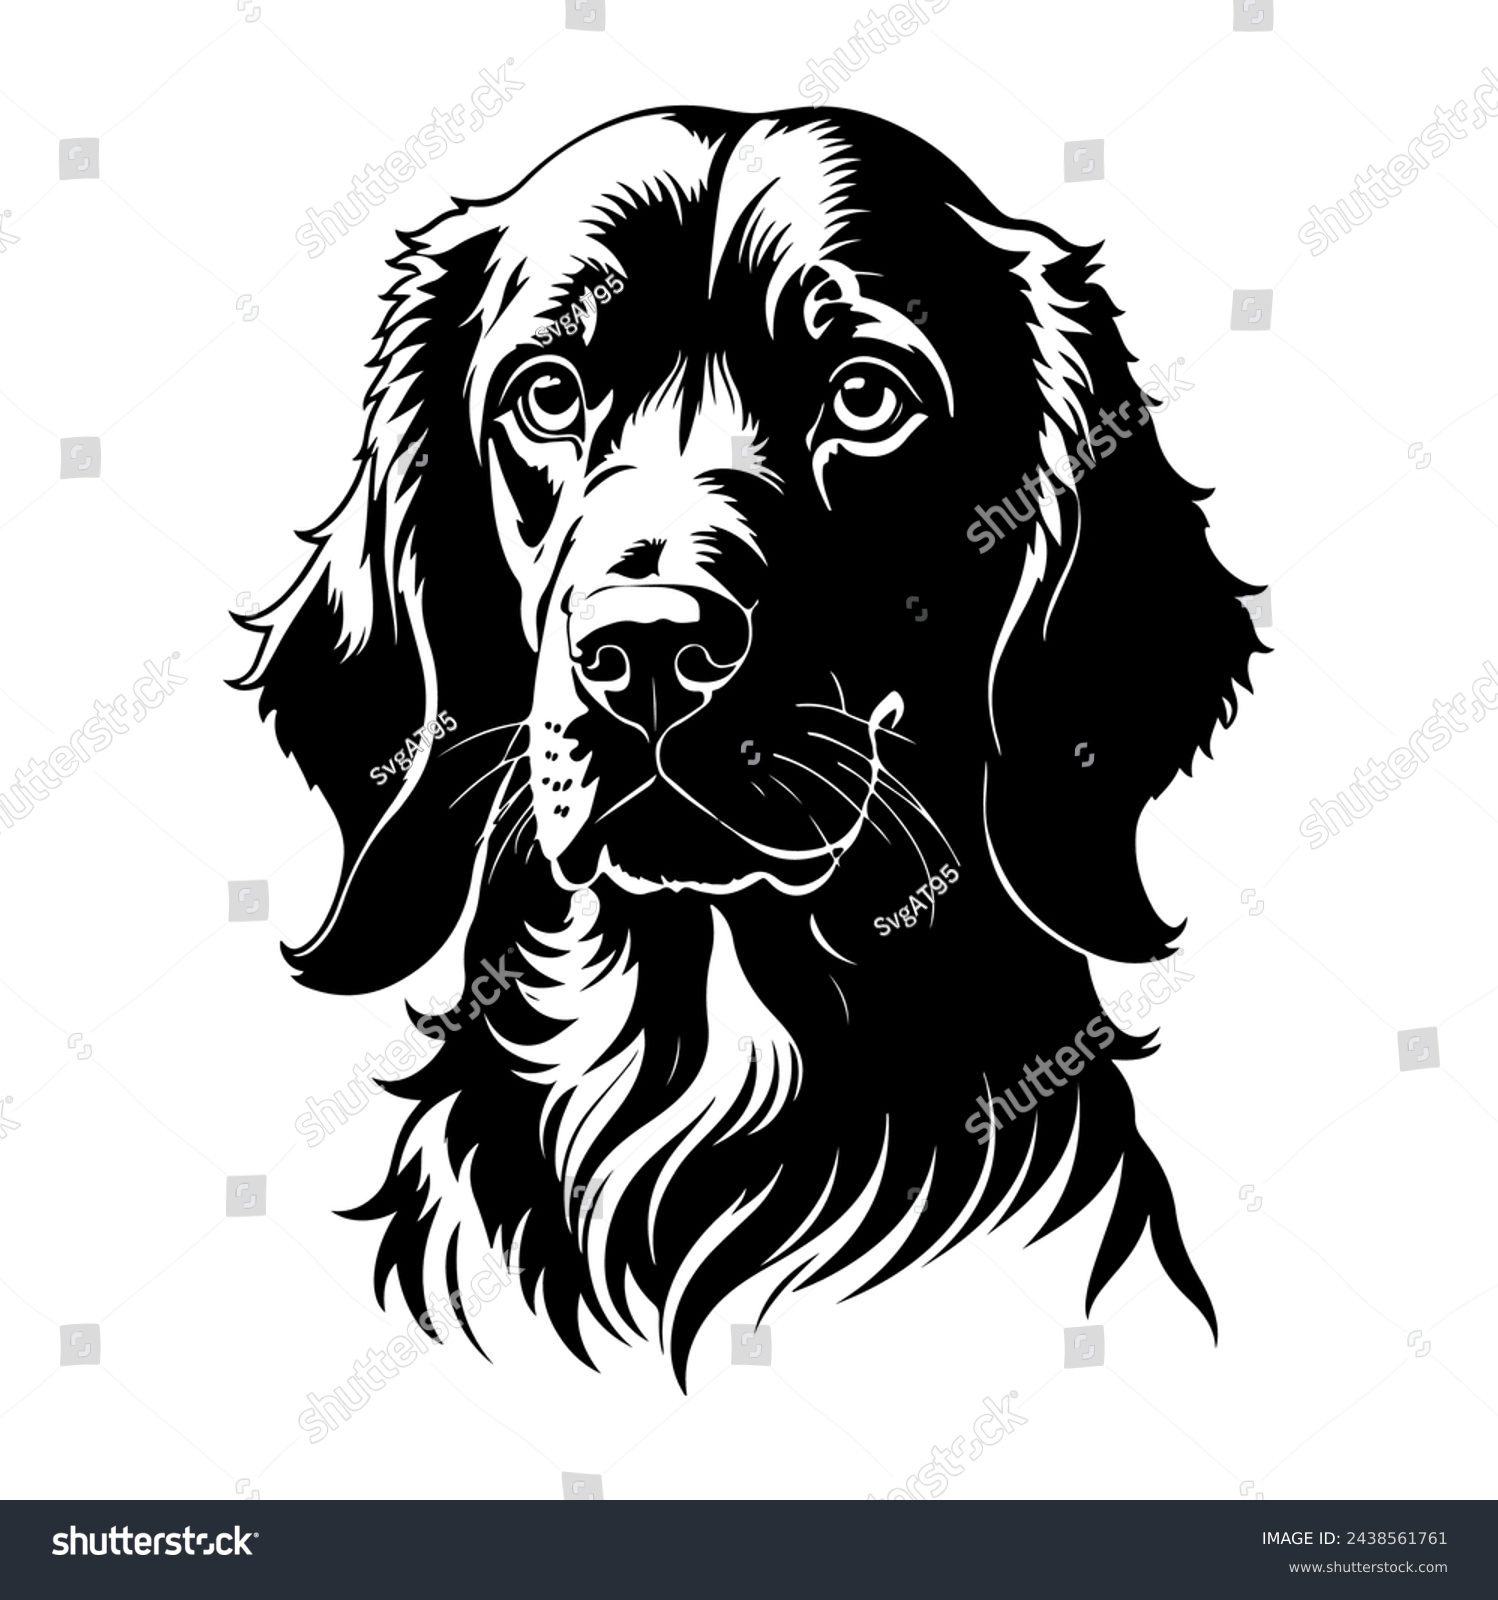 SVG of Portrait of a Gordon Setter Dog Vector isolated on white background, Dog Silhouettes. svg